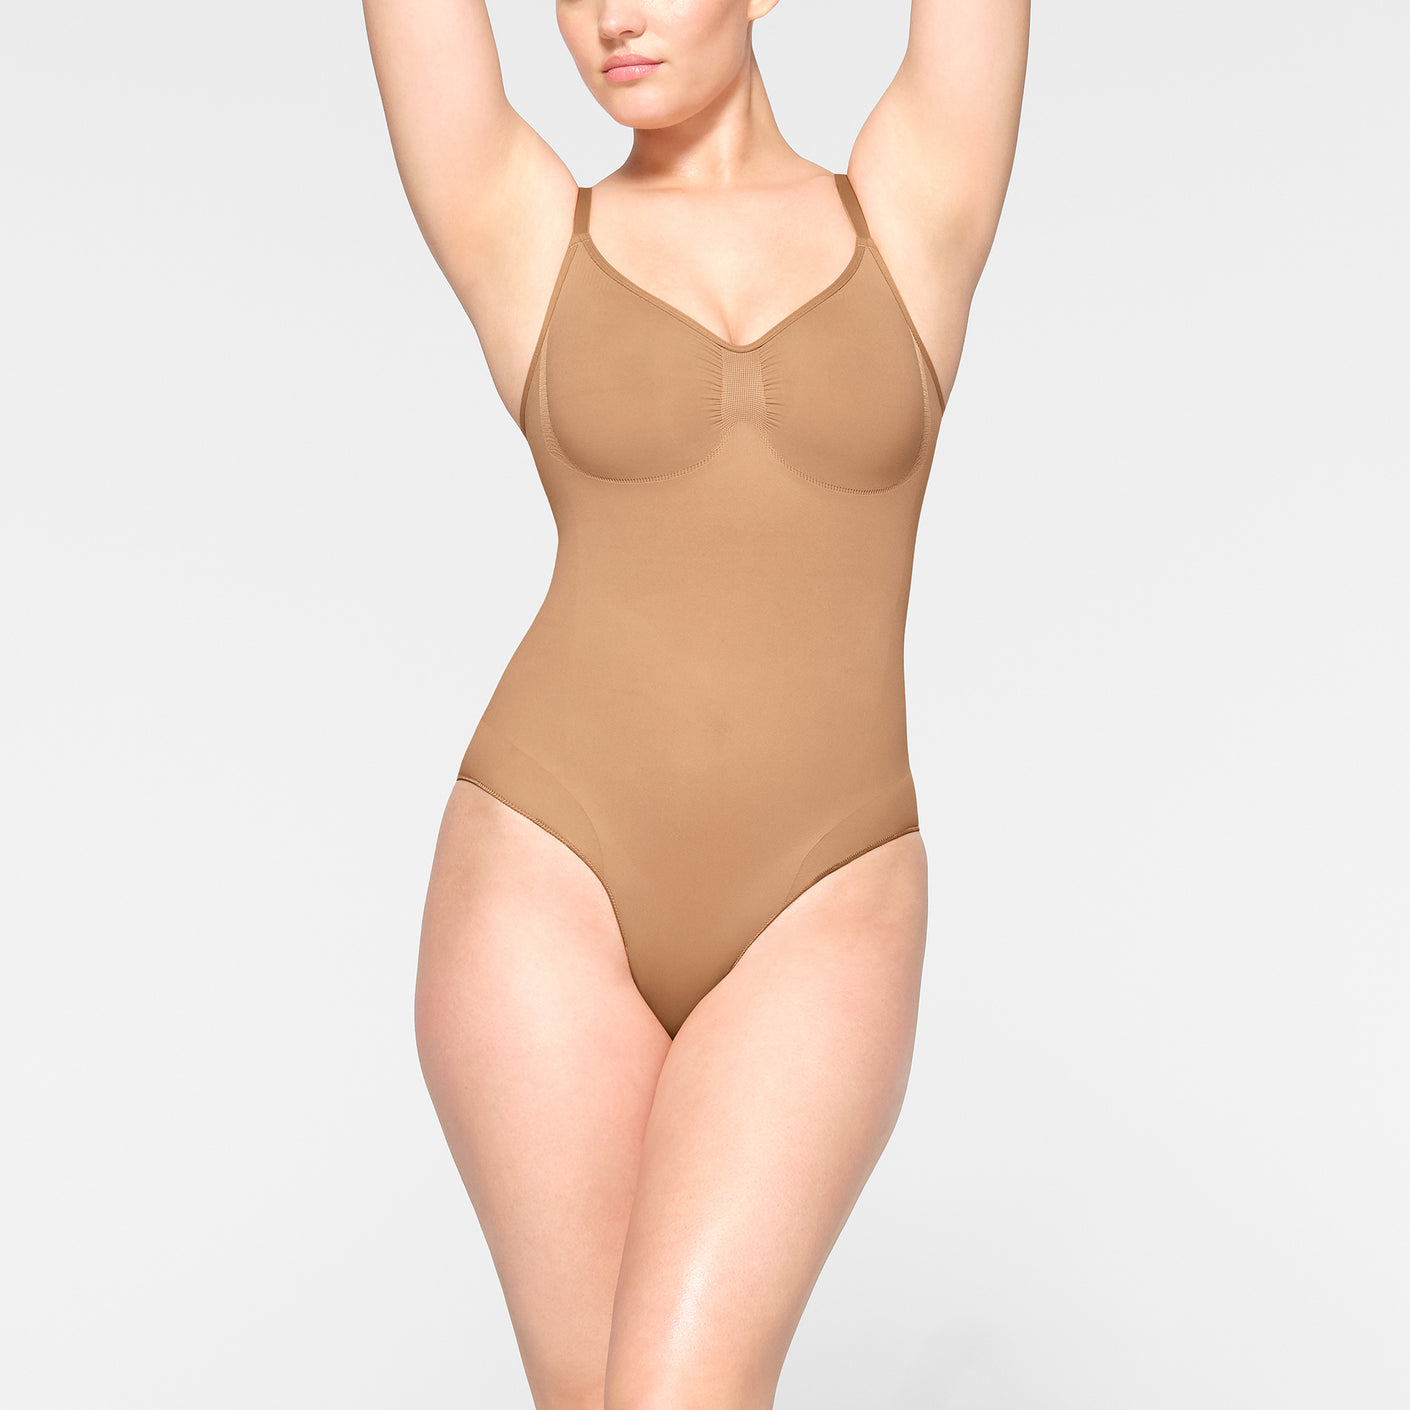 SKIMS - Solutionwear™ — the shapewear that changed the industry is  available now in 9 tonal colors and in sizes XXS - 5X. Shop SKIMS